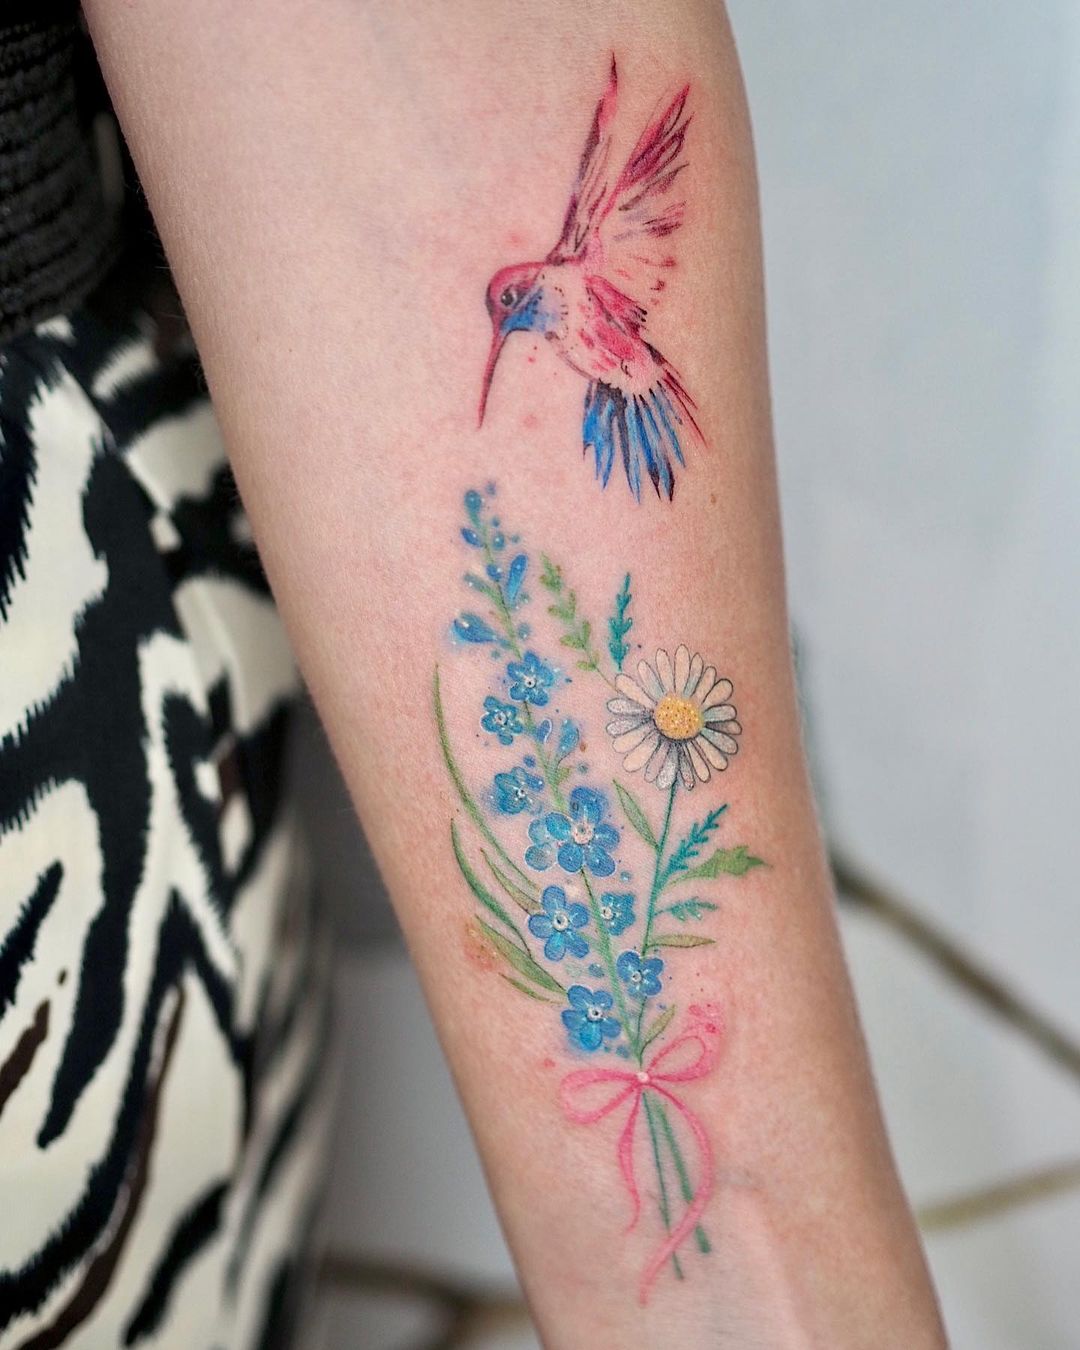 Top 15 Hummingbird Tattoo Designs And Meanings